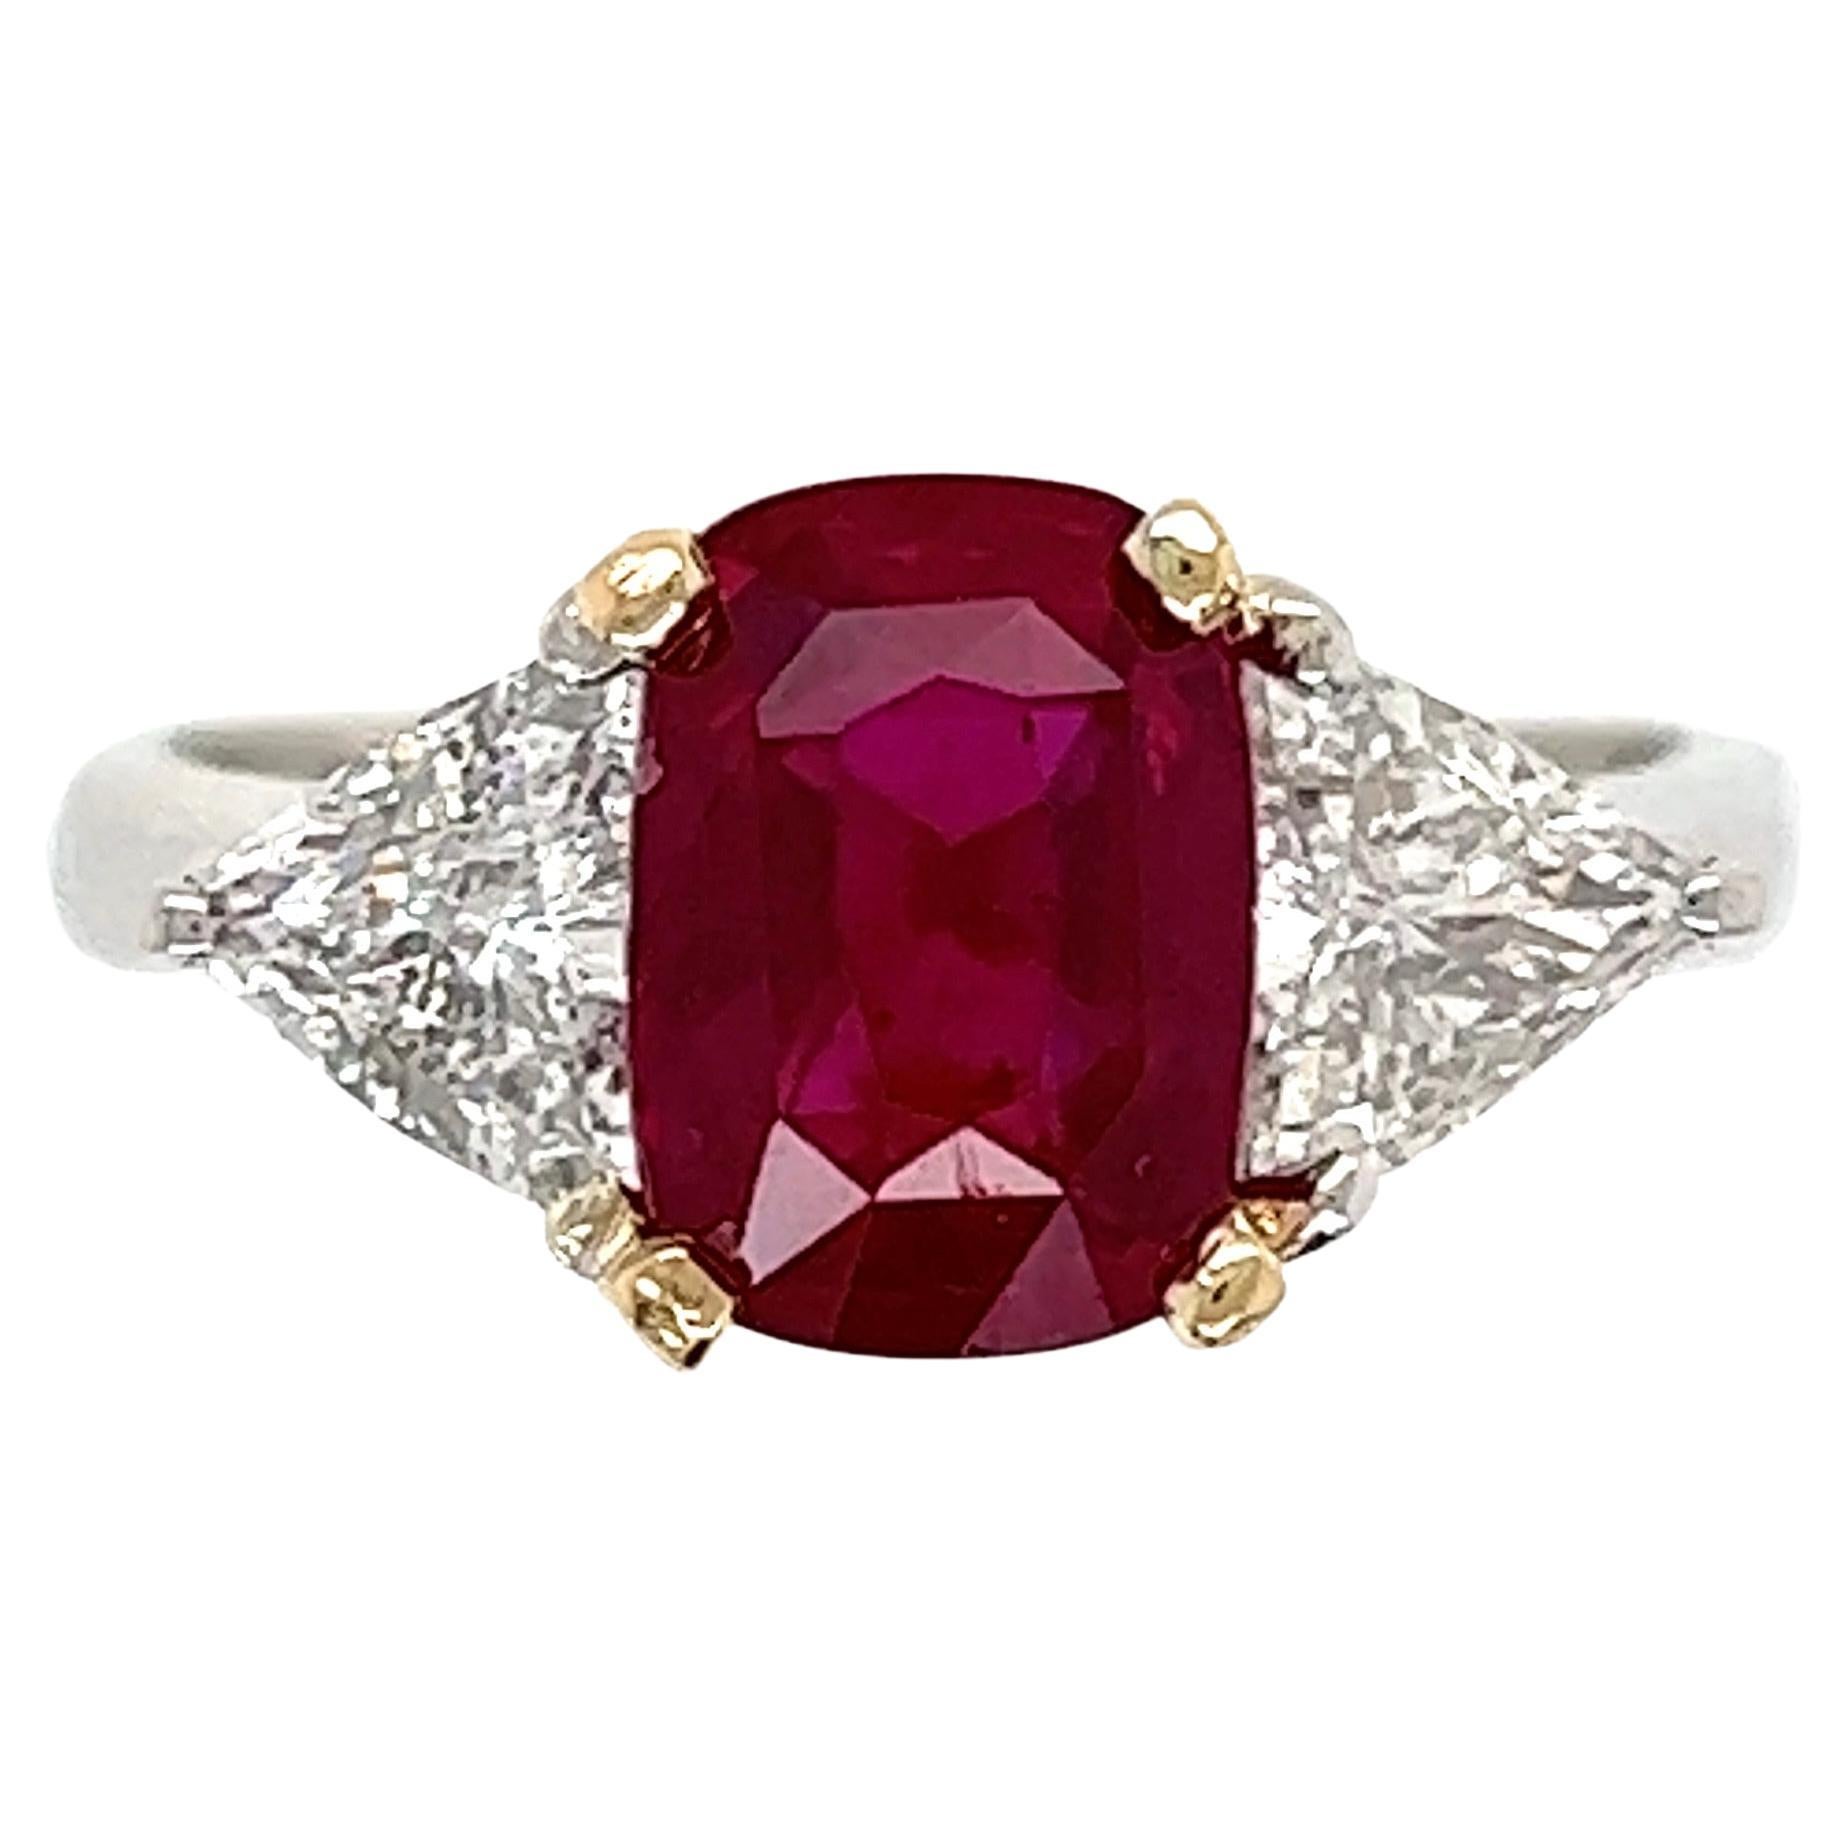 2.80 Carat Ruby GIA and Trillion Diamond 3-Stone Gold Ring Estate Fine Jewelry For Sale